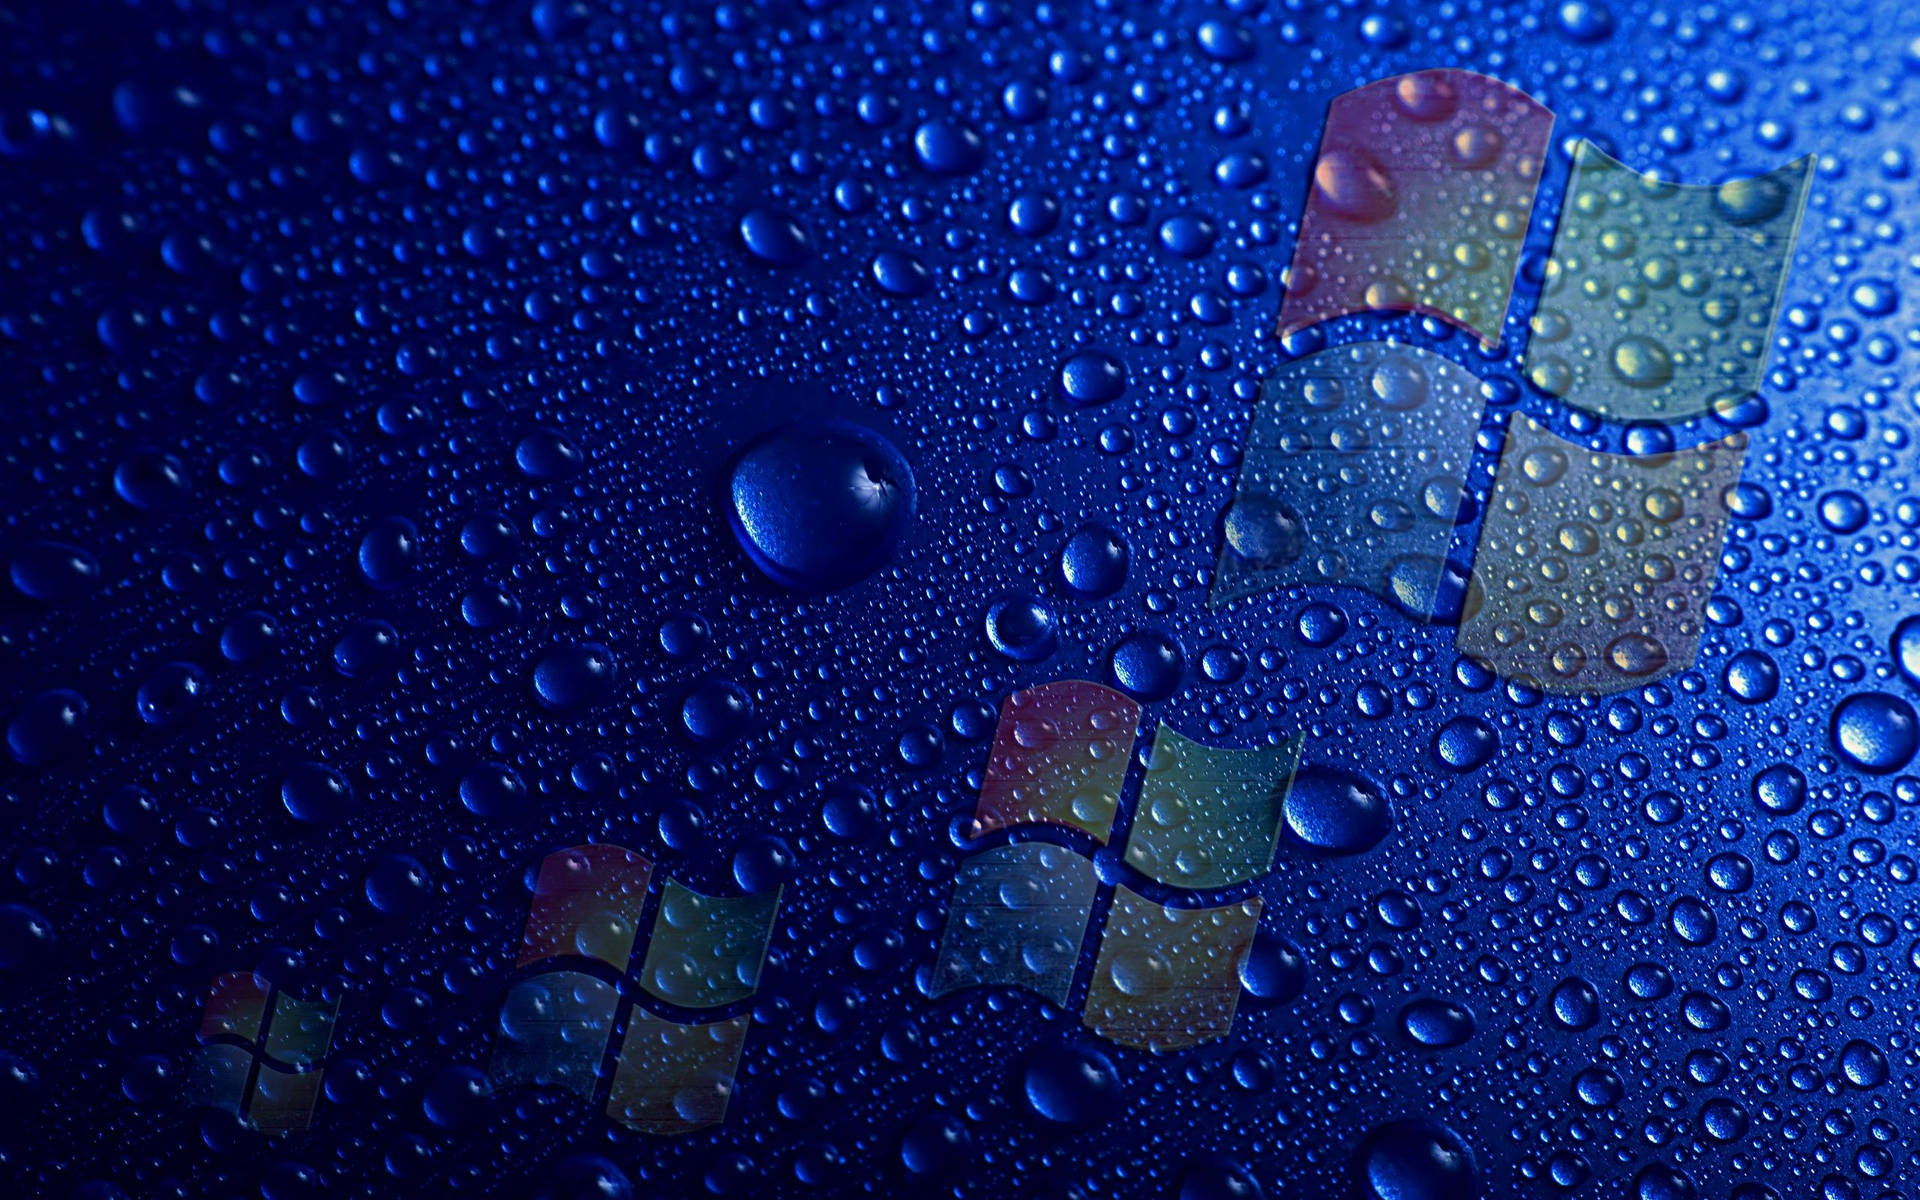 Windows 10 Hd Water Droplets Background